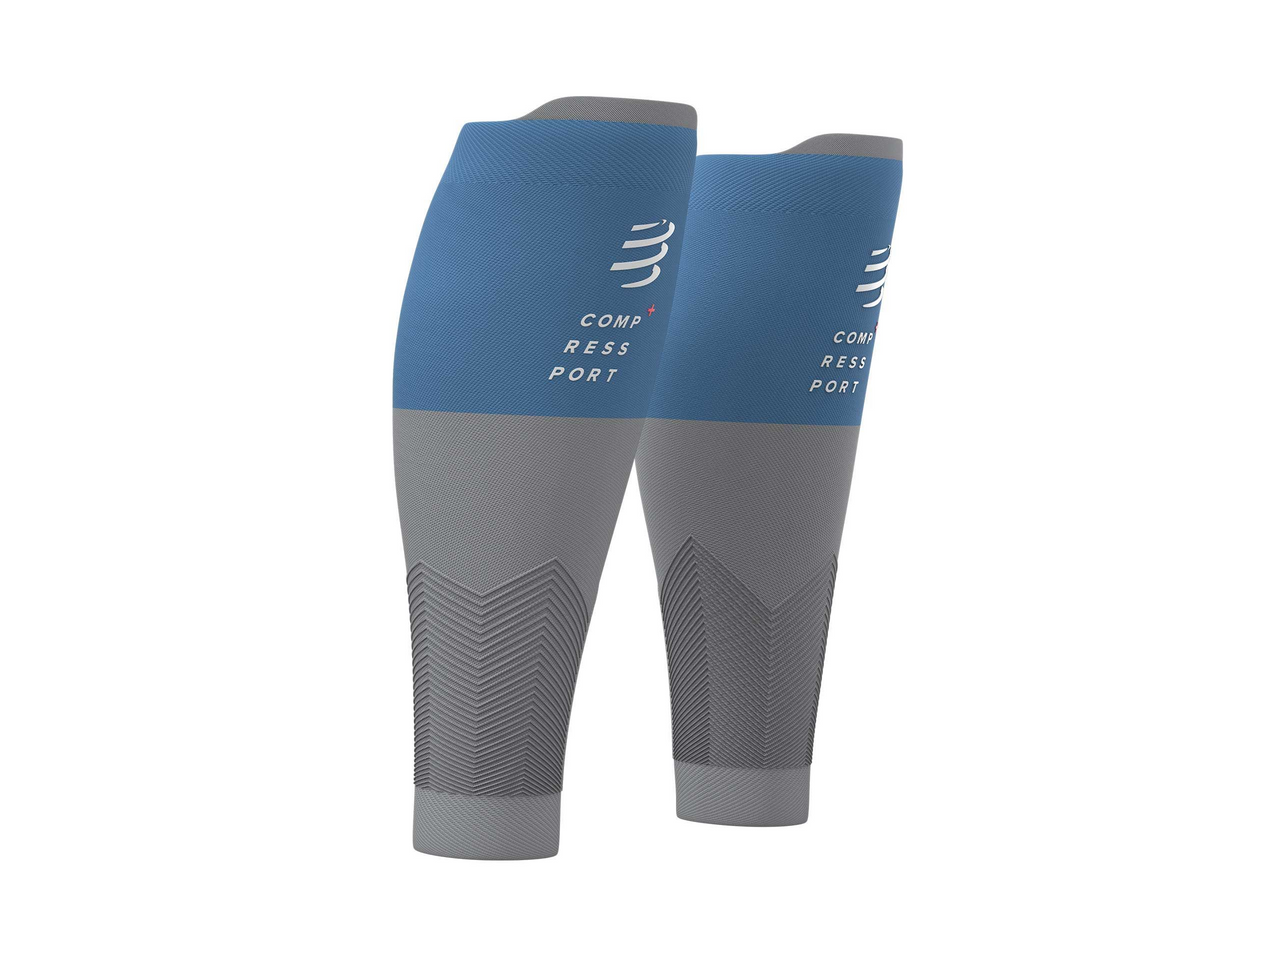 Compressport R2V2 - T2 | Pacific Blue/Alloy | Calf Sleeves